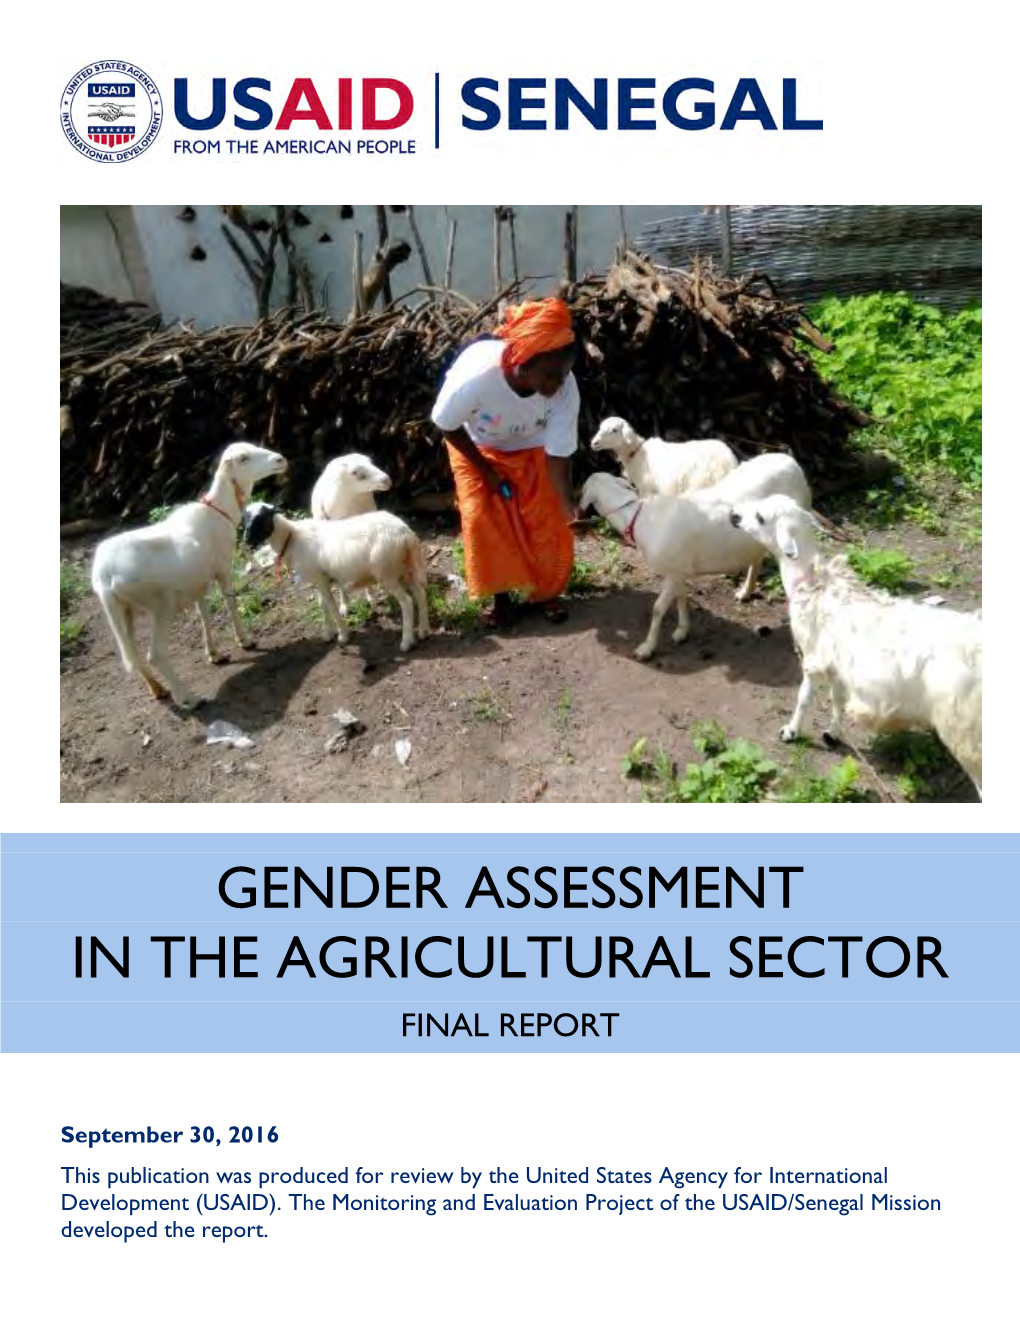 Gender Assessment in the Agricultural Sector Final Report